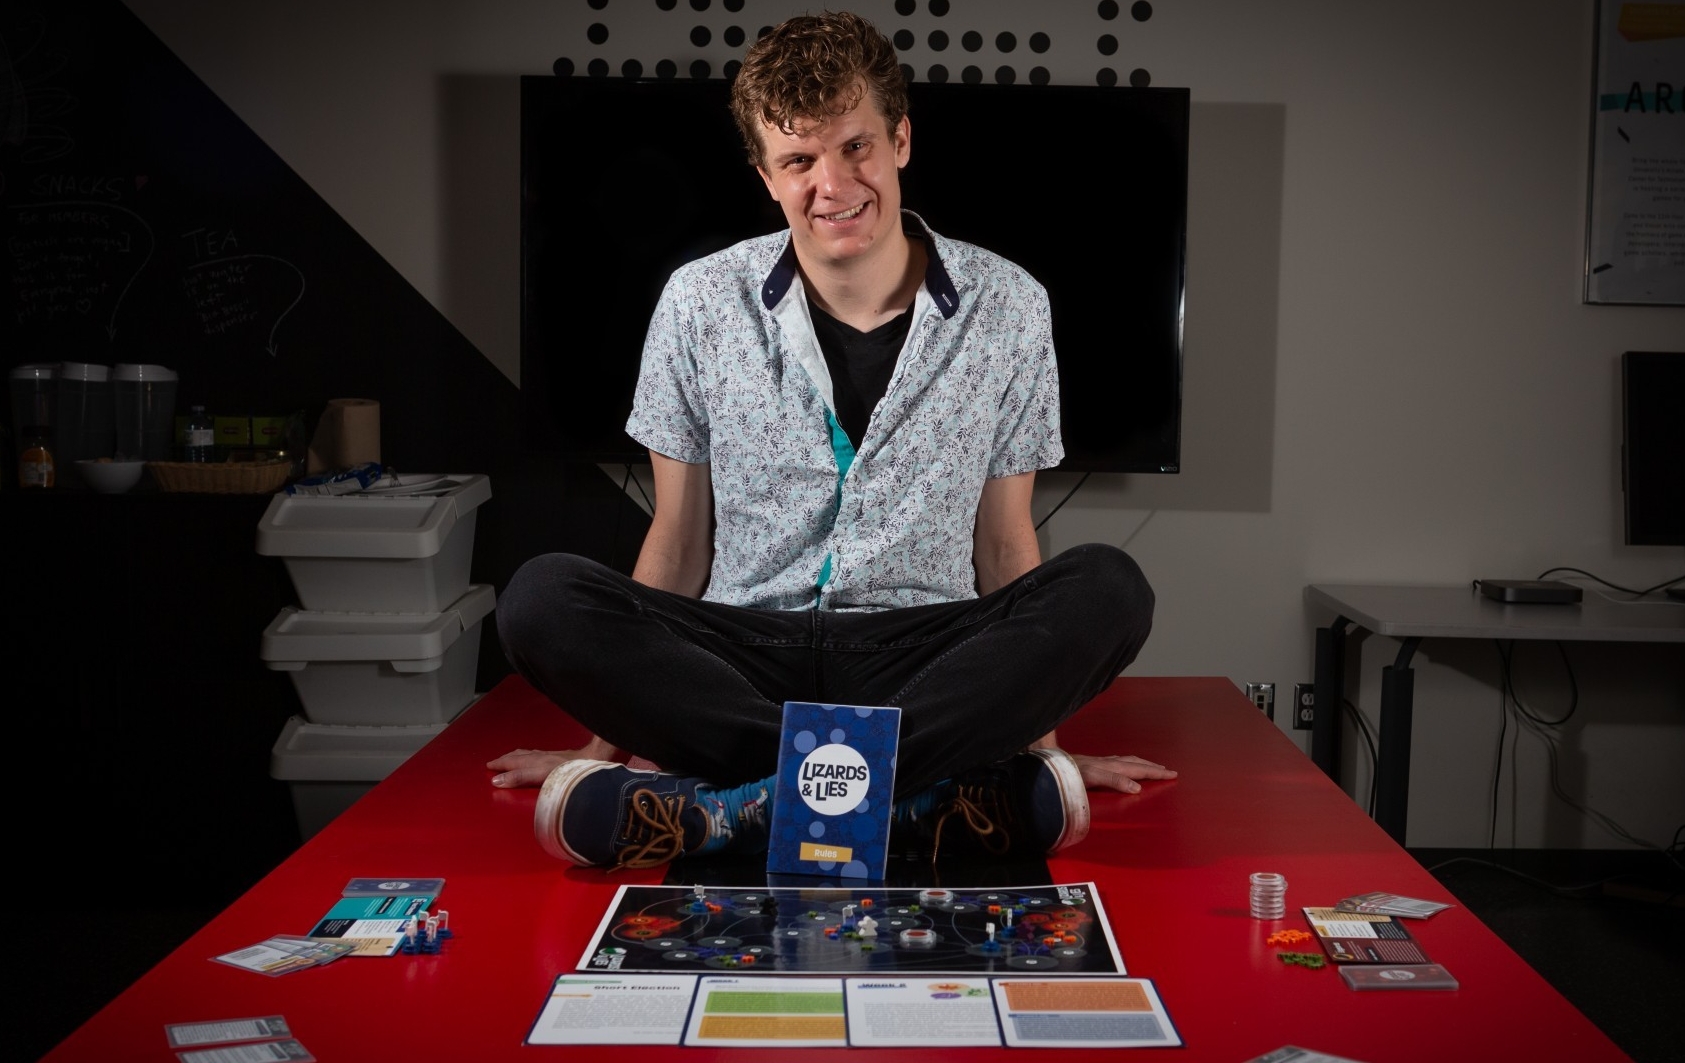 Young man with short, curly blonde hair, wearing a shirt sleeved shirt and black jeans and sitting on a table with a board game called "Lizards and Lies" spread out in front of him.